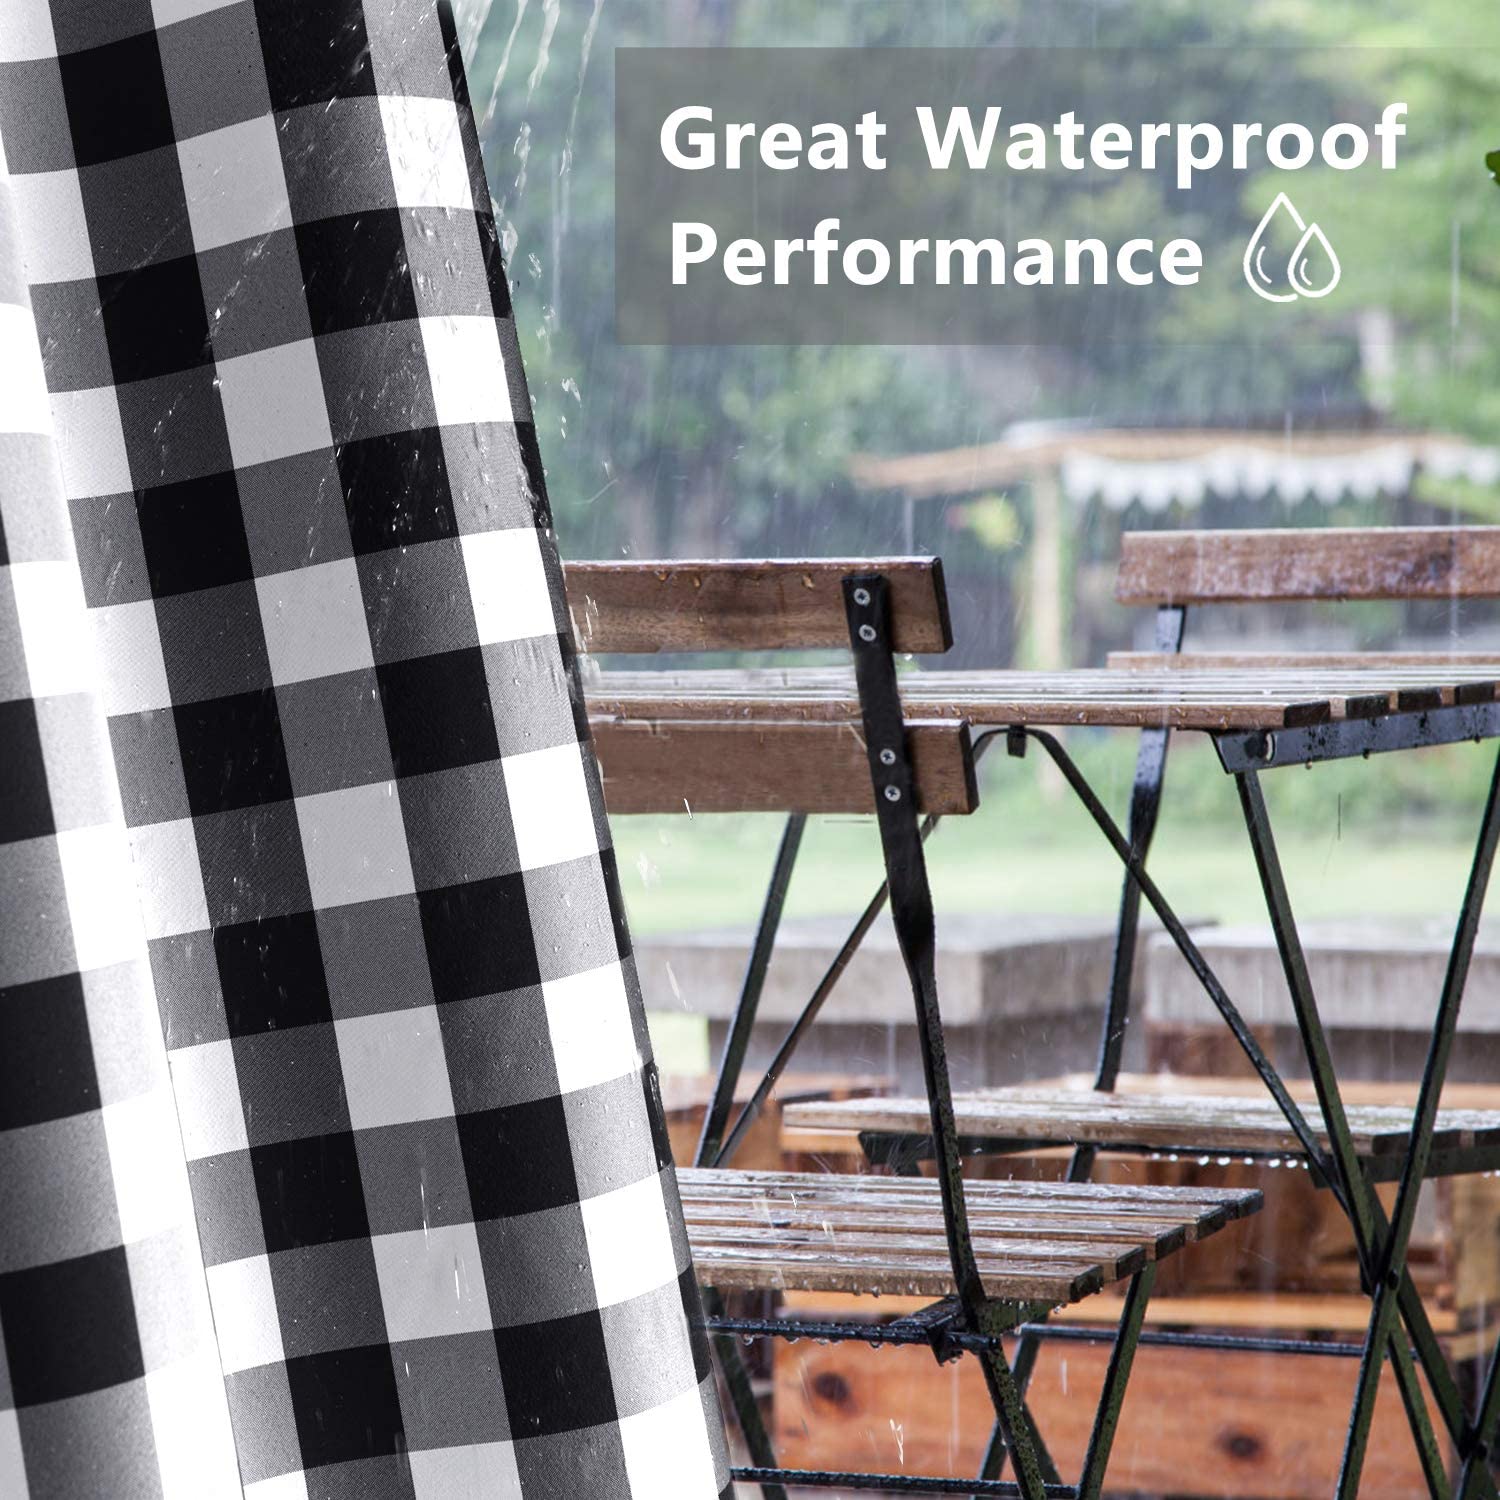 Plaid Top & Bottom Grommet Windproof Outdoor for Gazebo, Porch and Cabana 1 Panel KGORGE Store